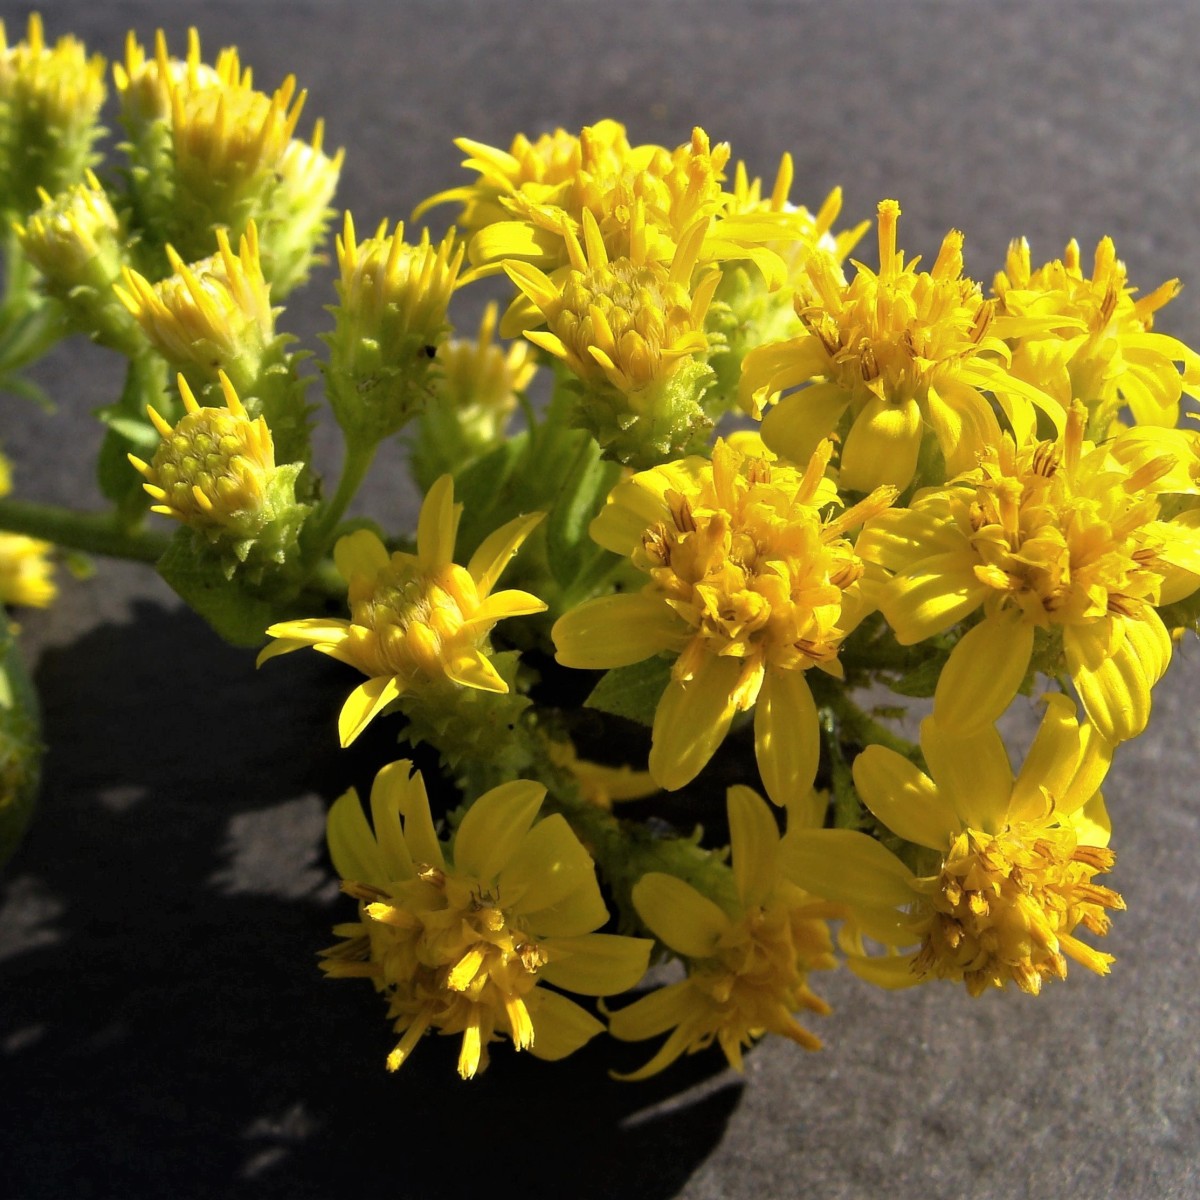 Know Your Natives – Downy Ragged Goldenrod